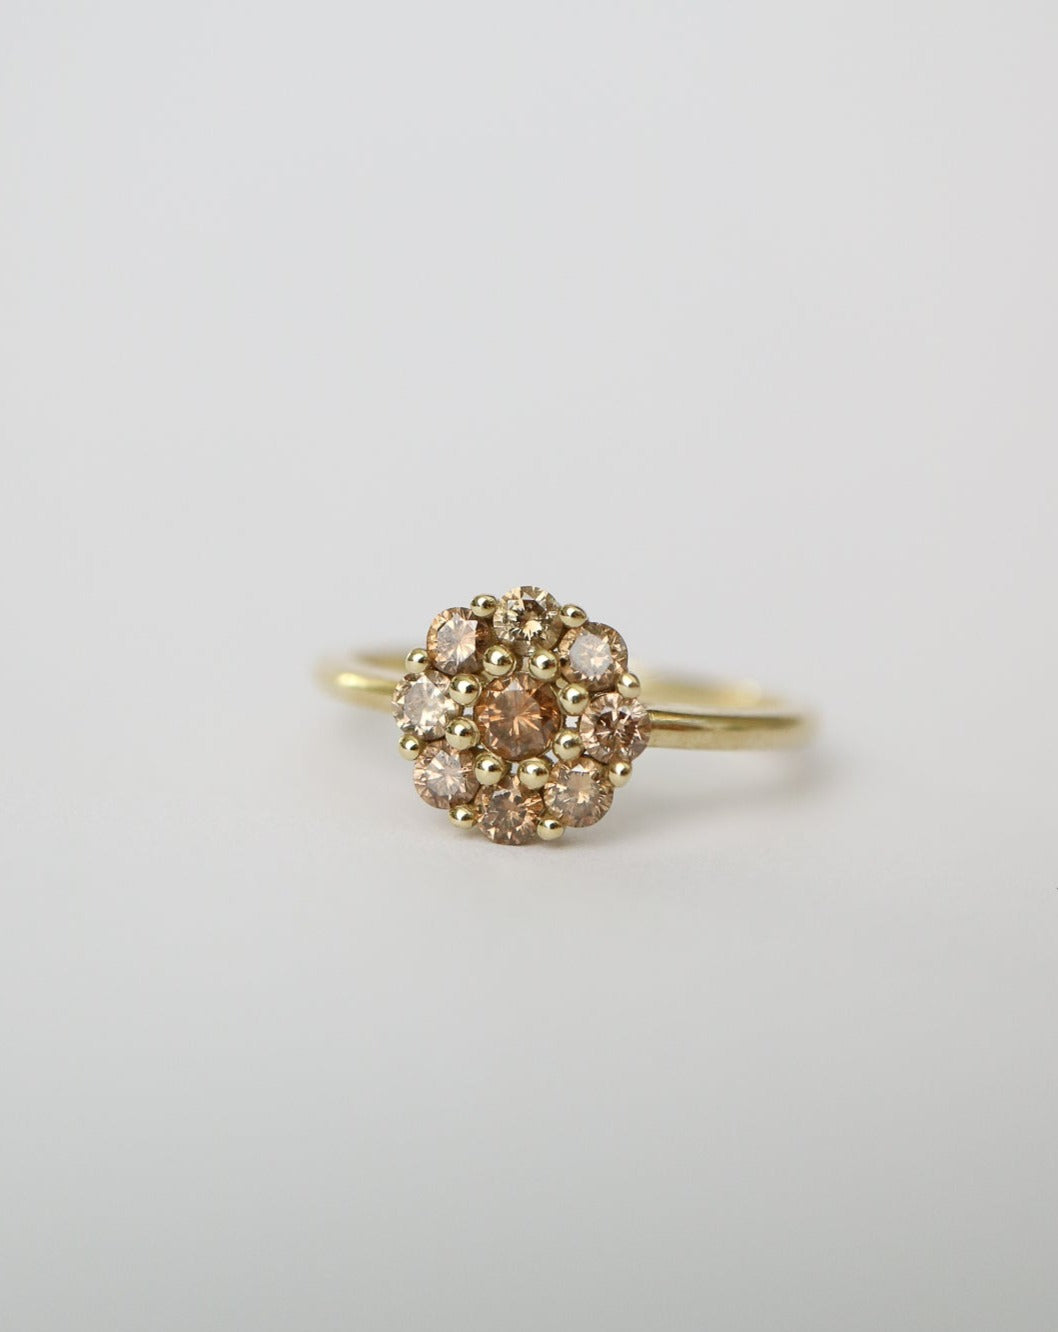 9ct cognac diamond ring from Collective & Co jewellery brand